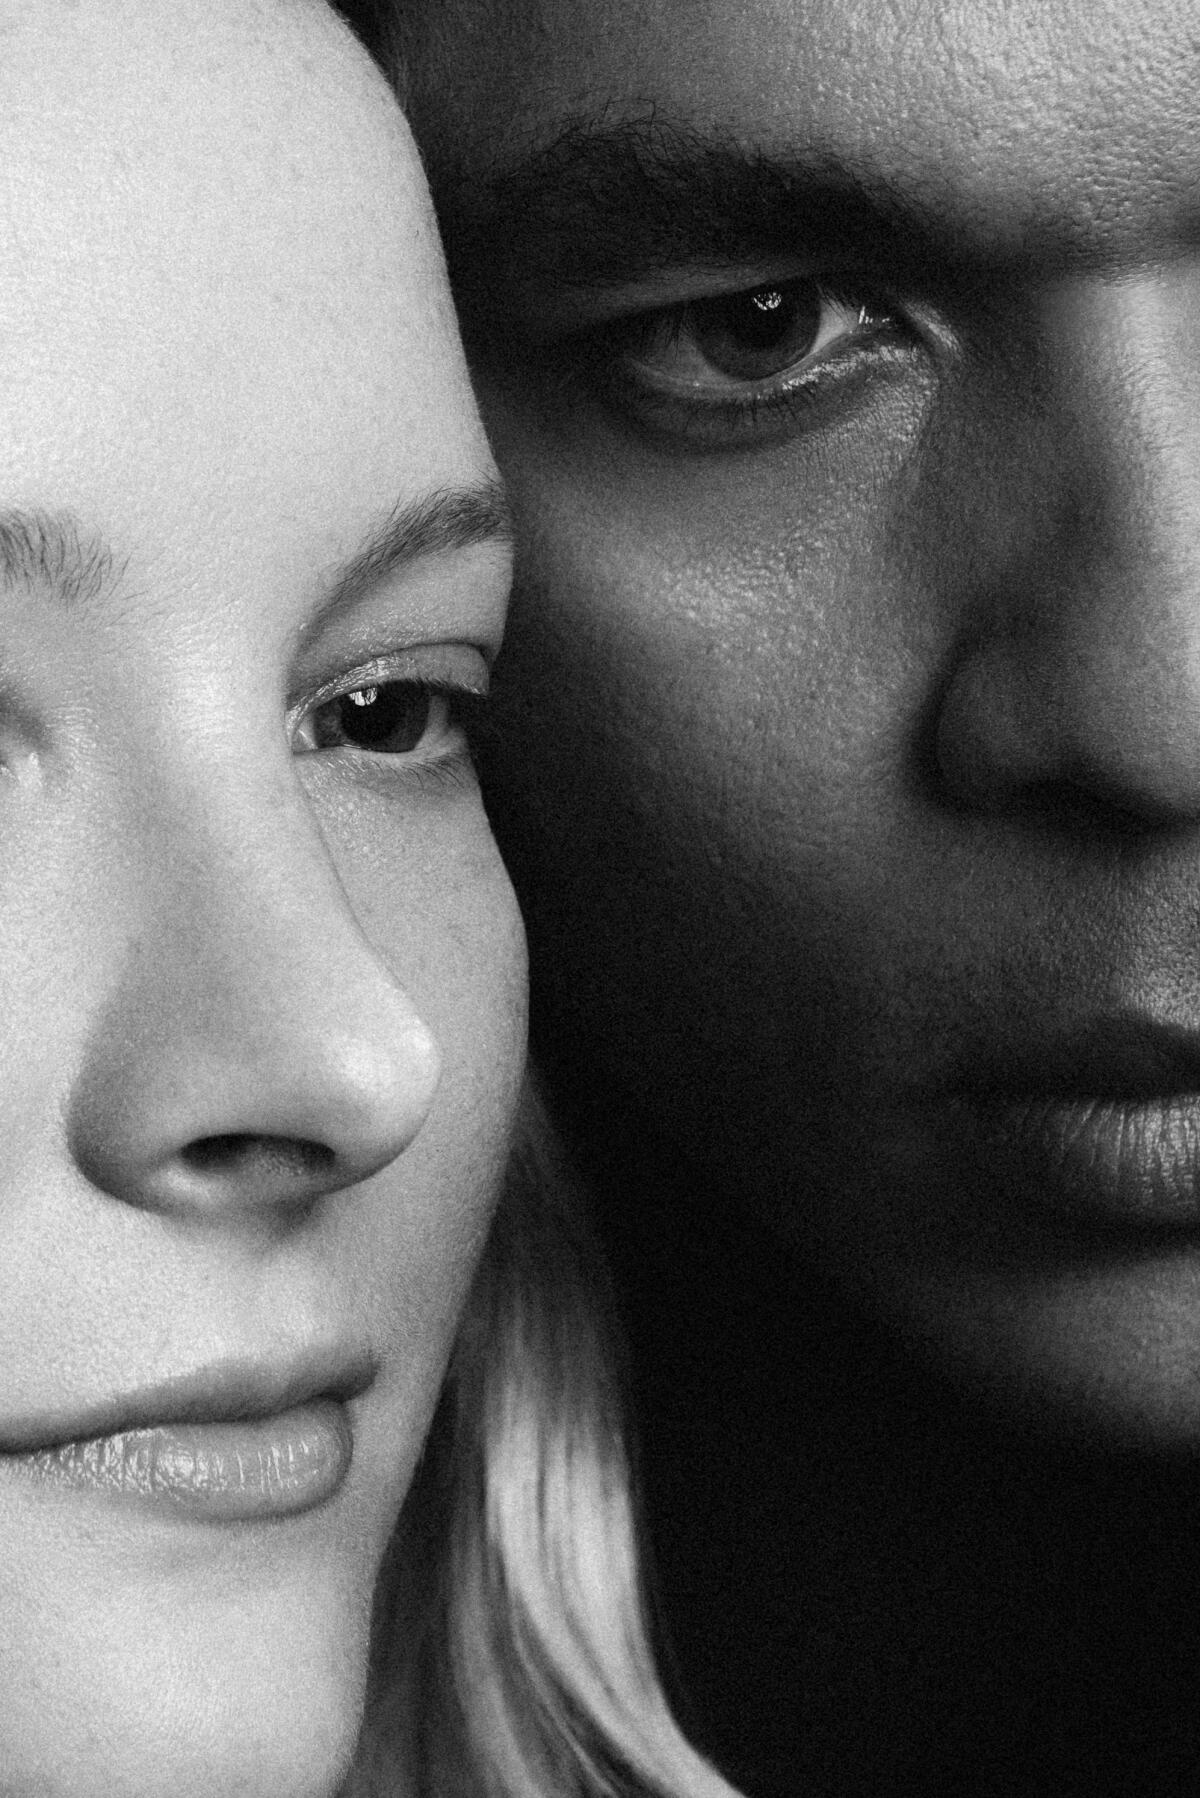 Actress Morfydd Clark and actor Ismael Cruz Córdova in a close-cropped, black-and-white shot of their faces close together.